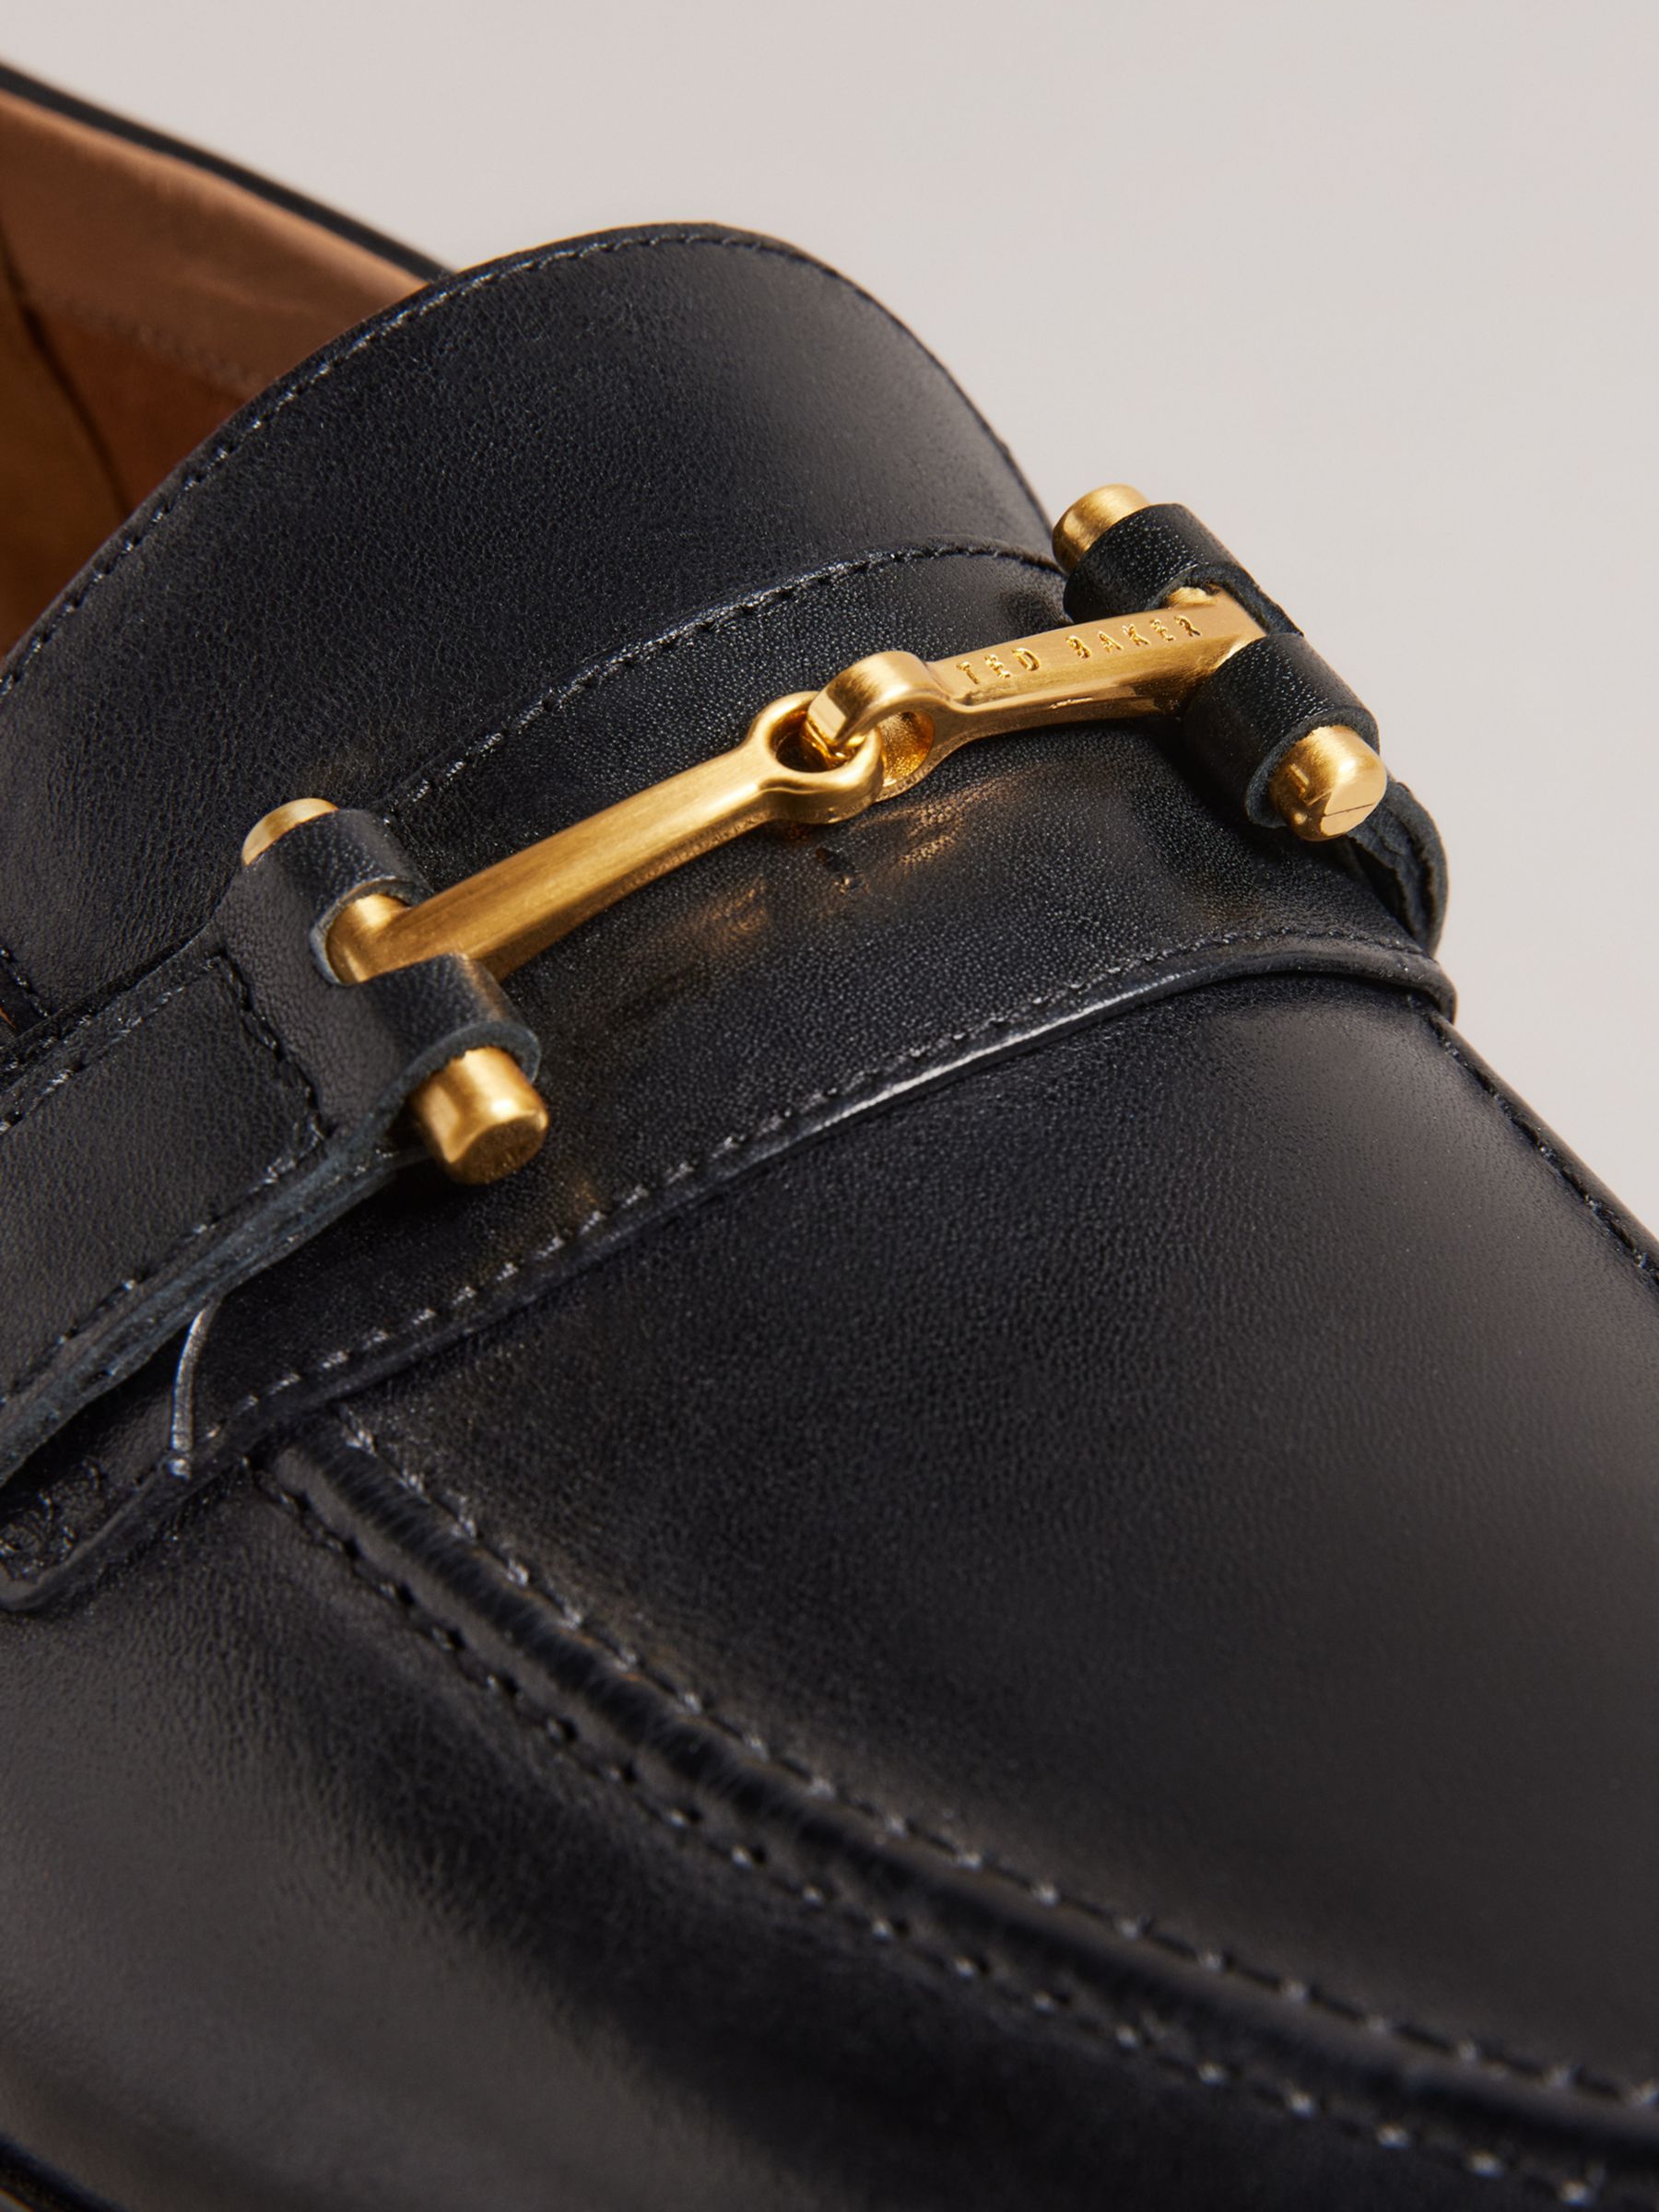 Black Leather Snaffle Loafers